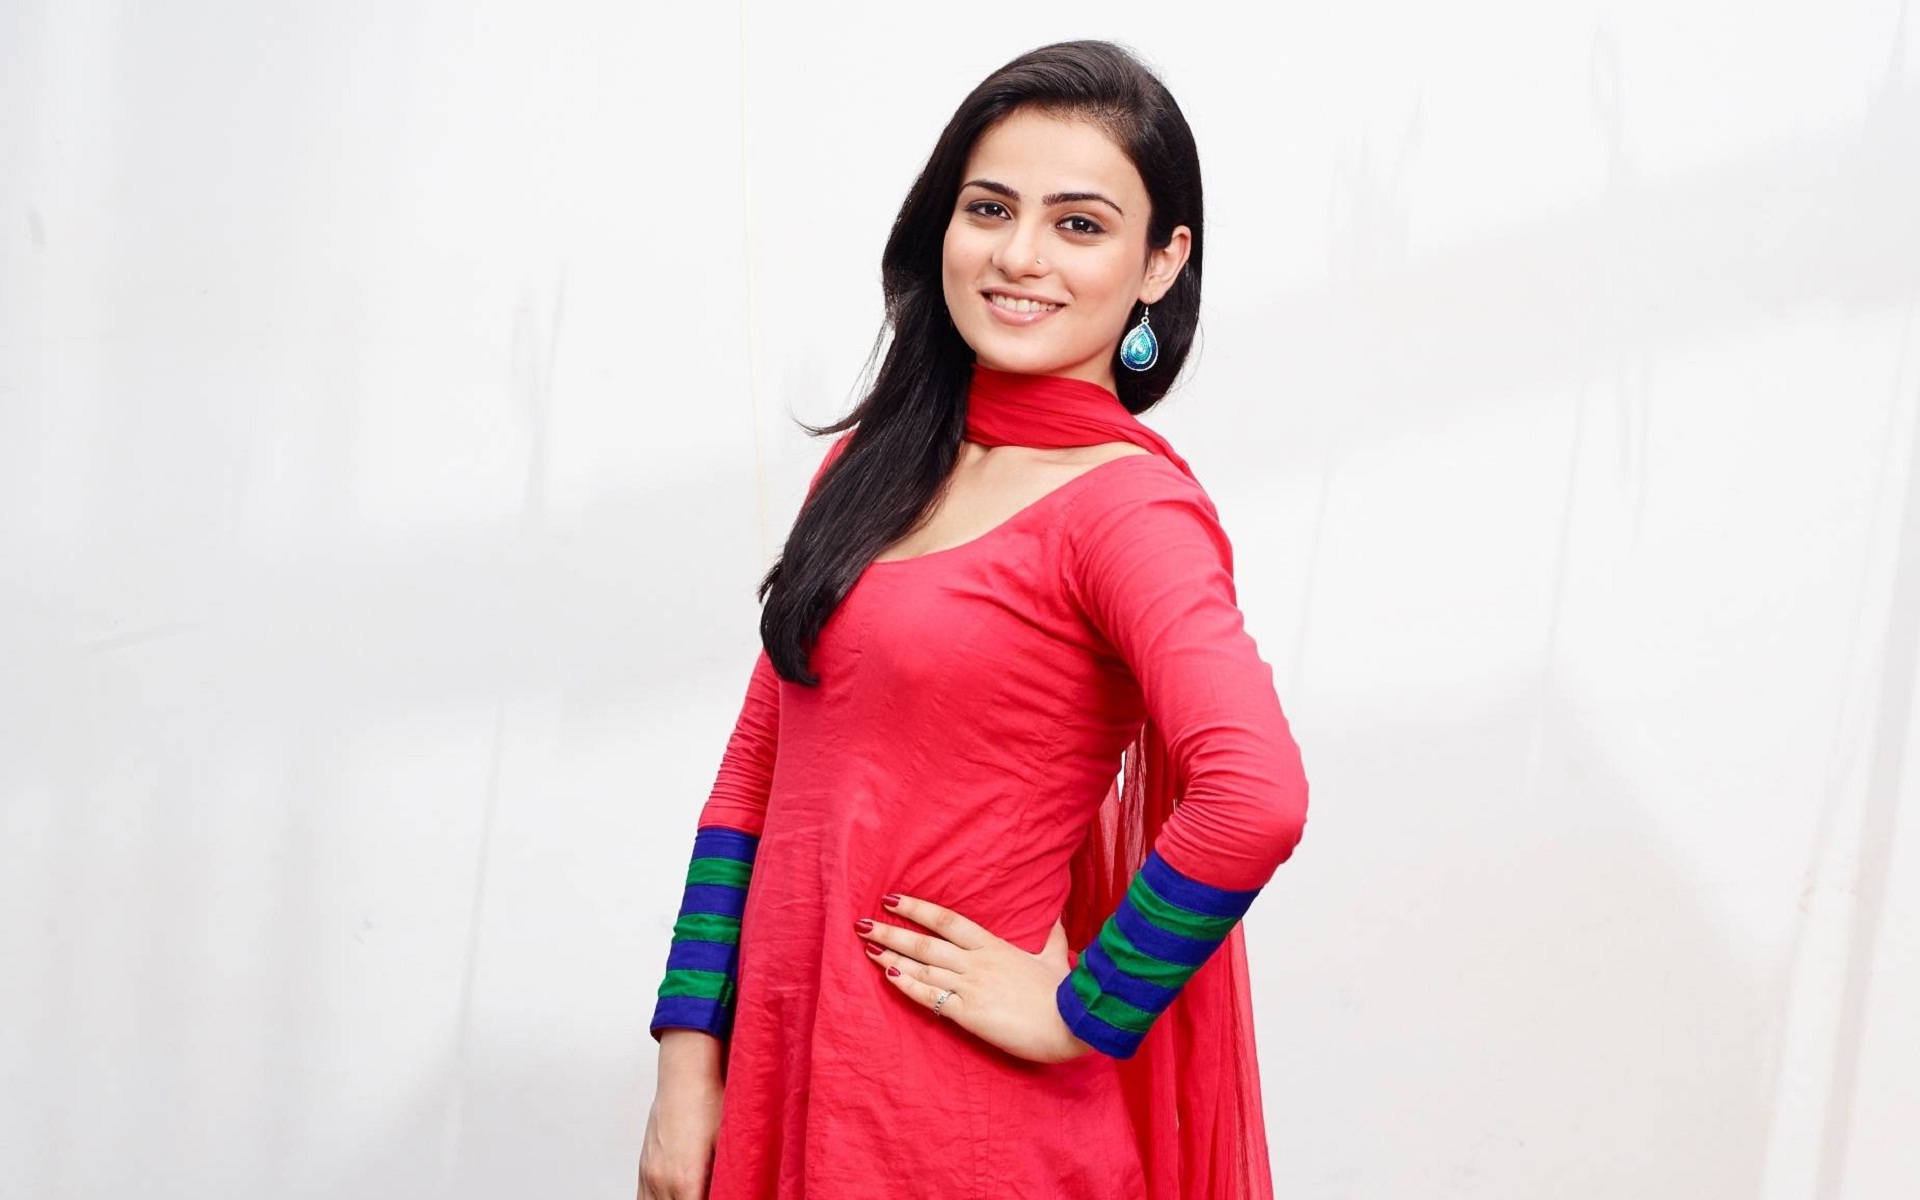 Beautiful Indian girl in red dress - New hd wallpaperNew hd wallpaper